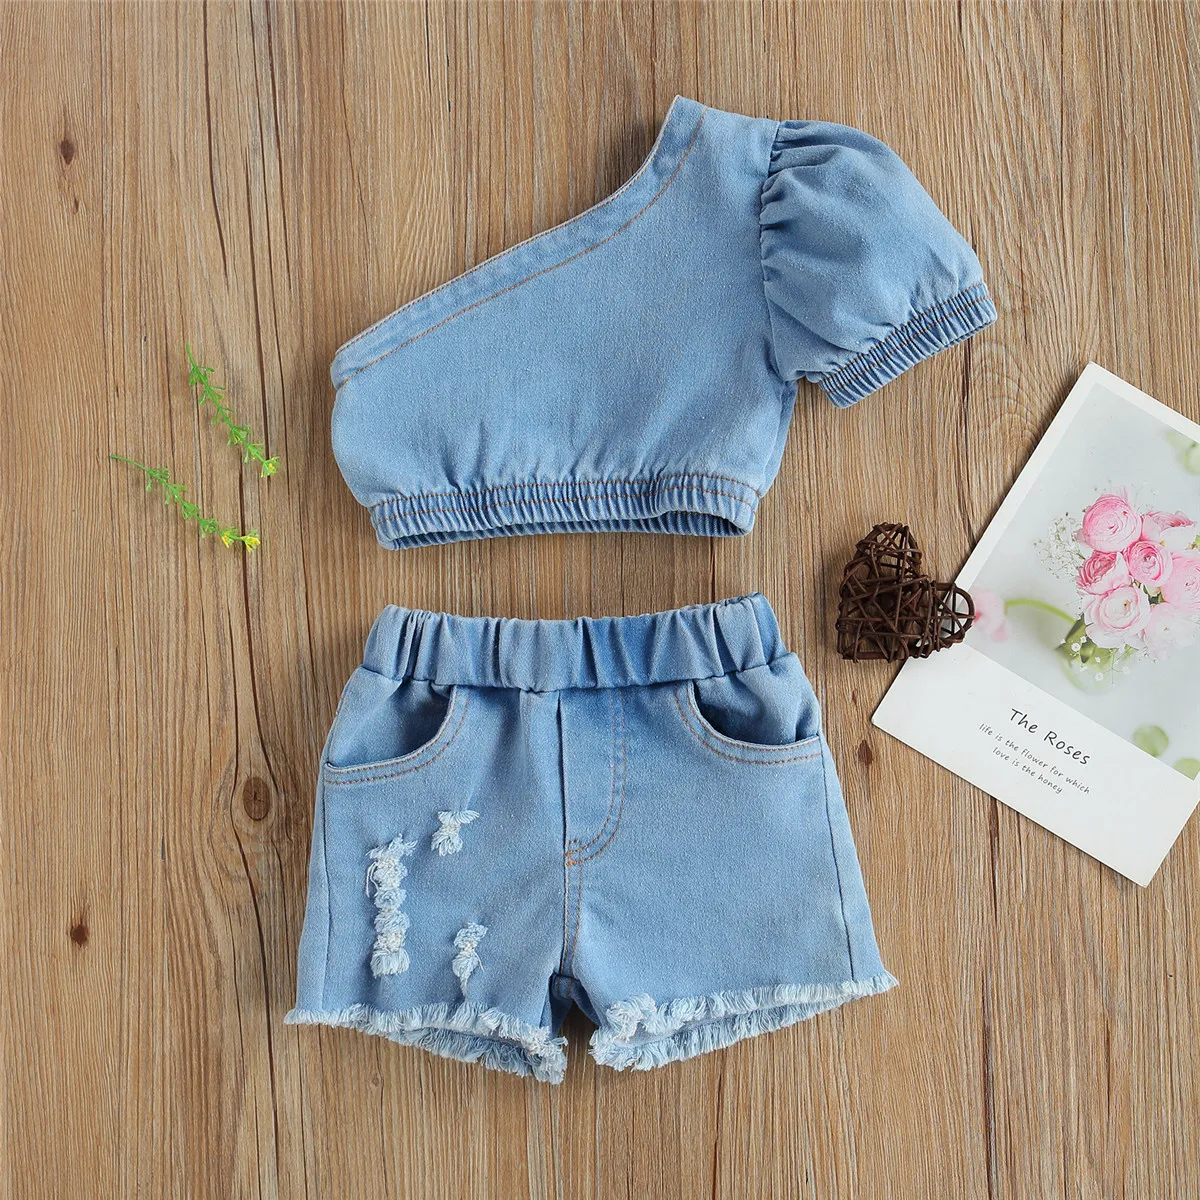 New Kids Girls Summer Top Shorts 3-Piece Suit Leopard Short Sleeve Pleated Vest Blue Jeans Side Pockets baby knitted clothing set